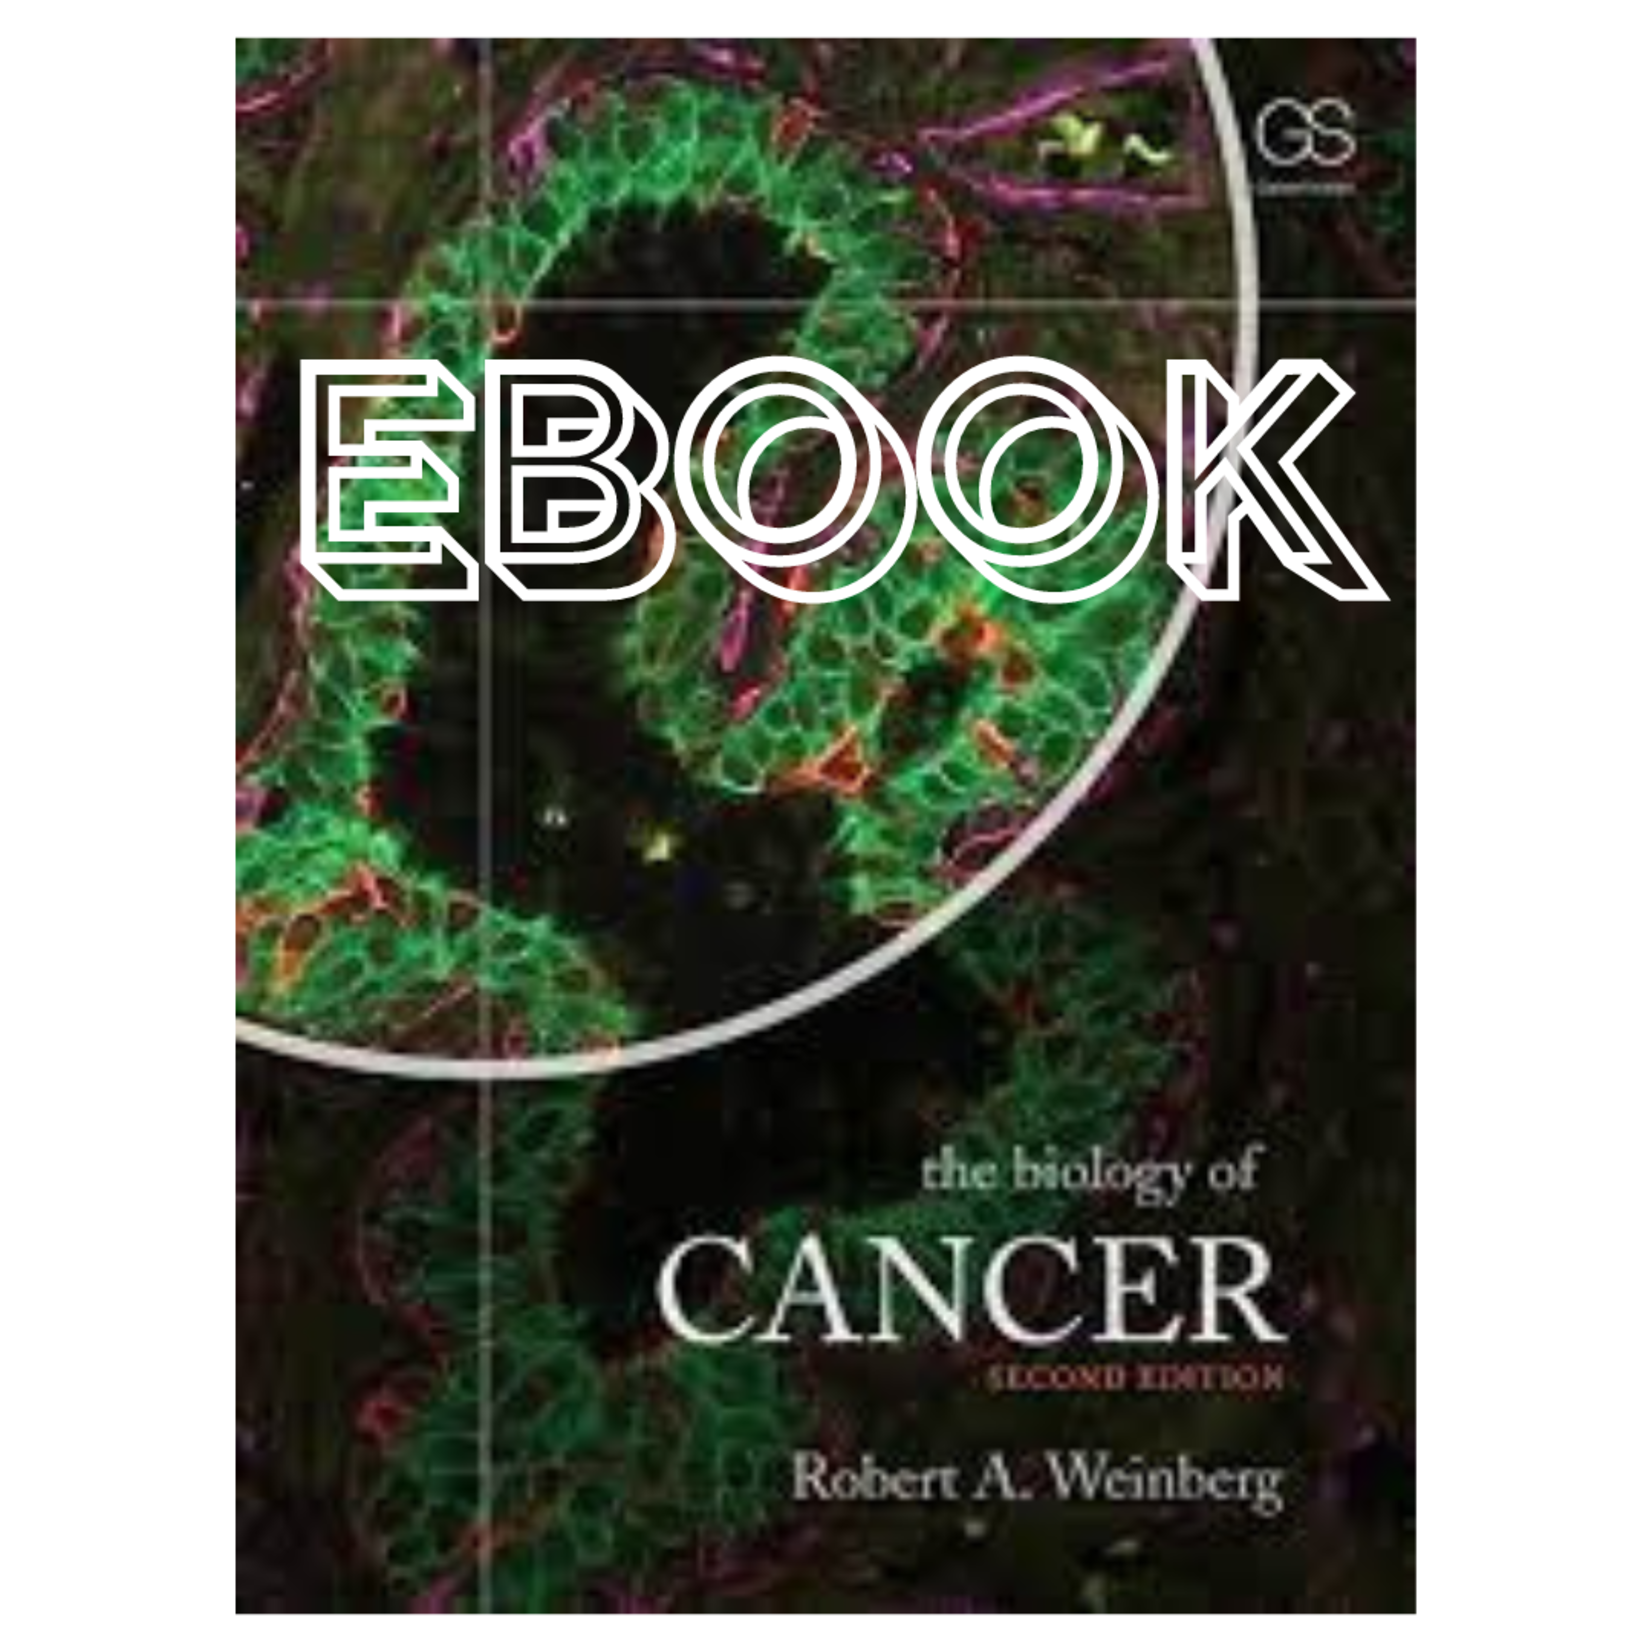 nelson Biology of Cancer EBOOK